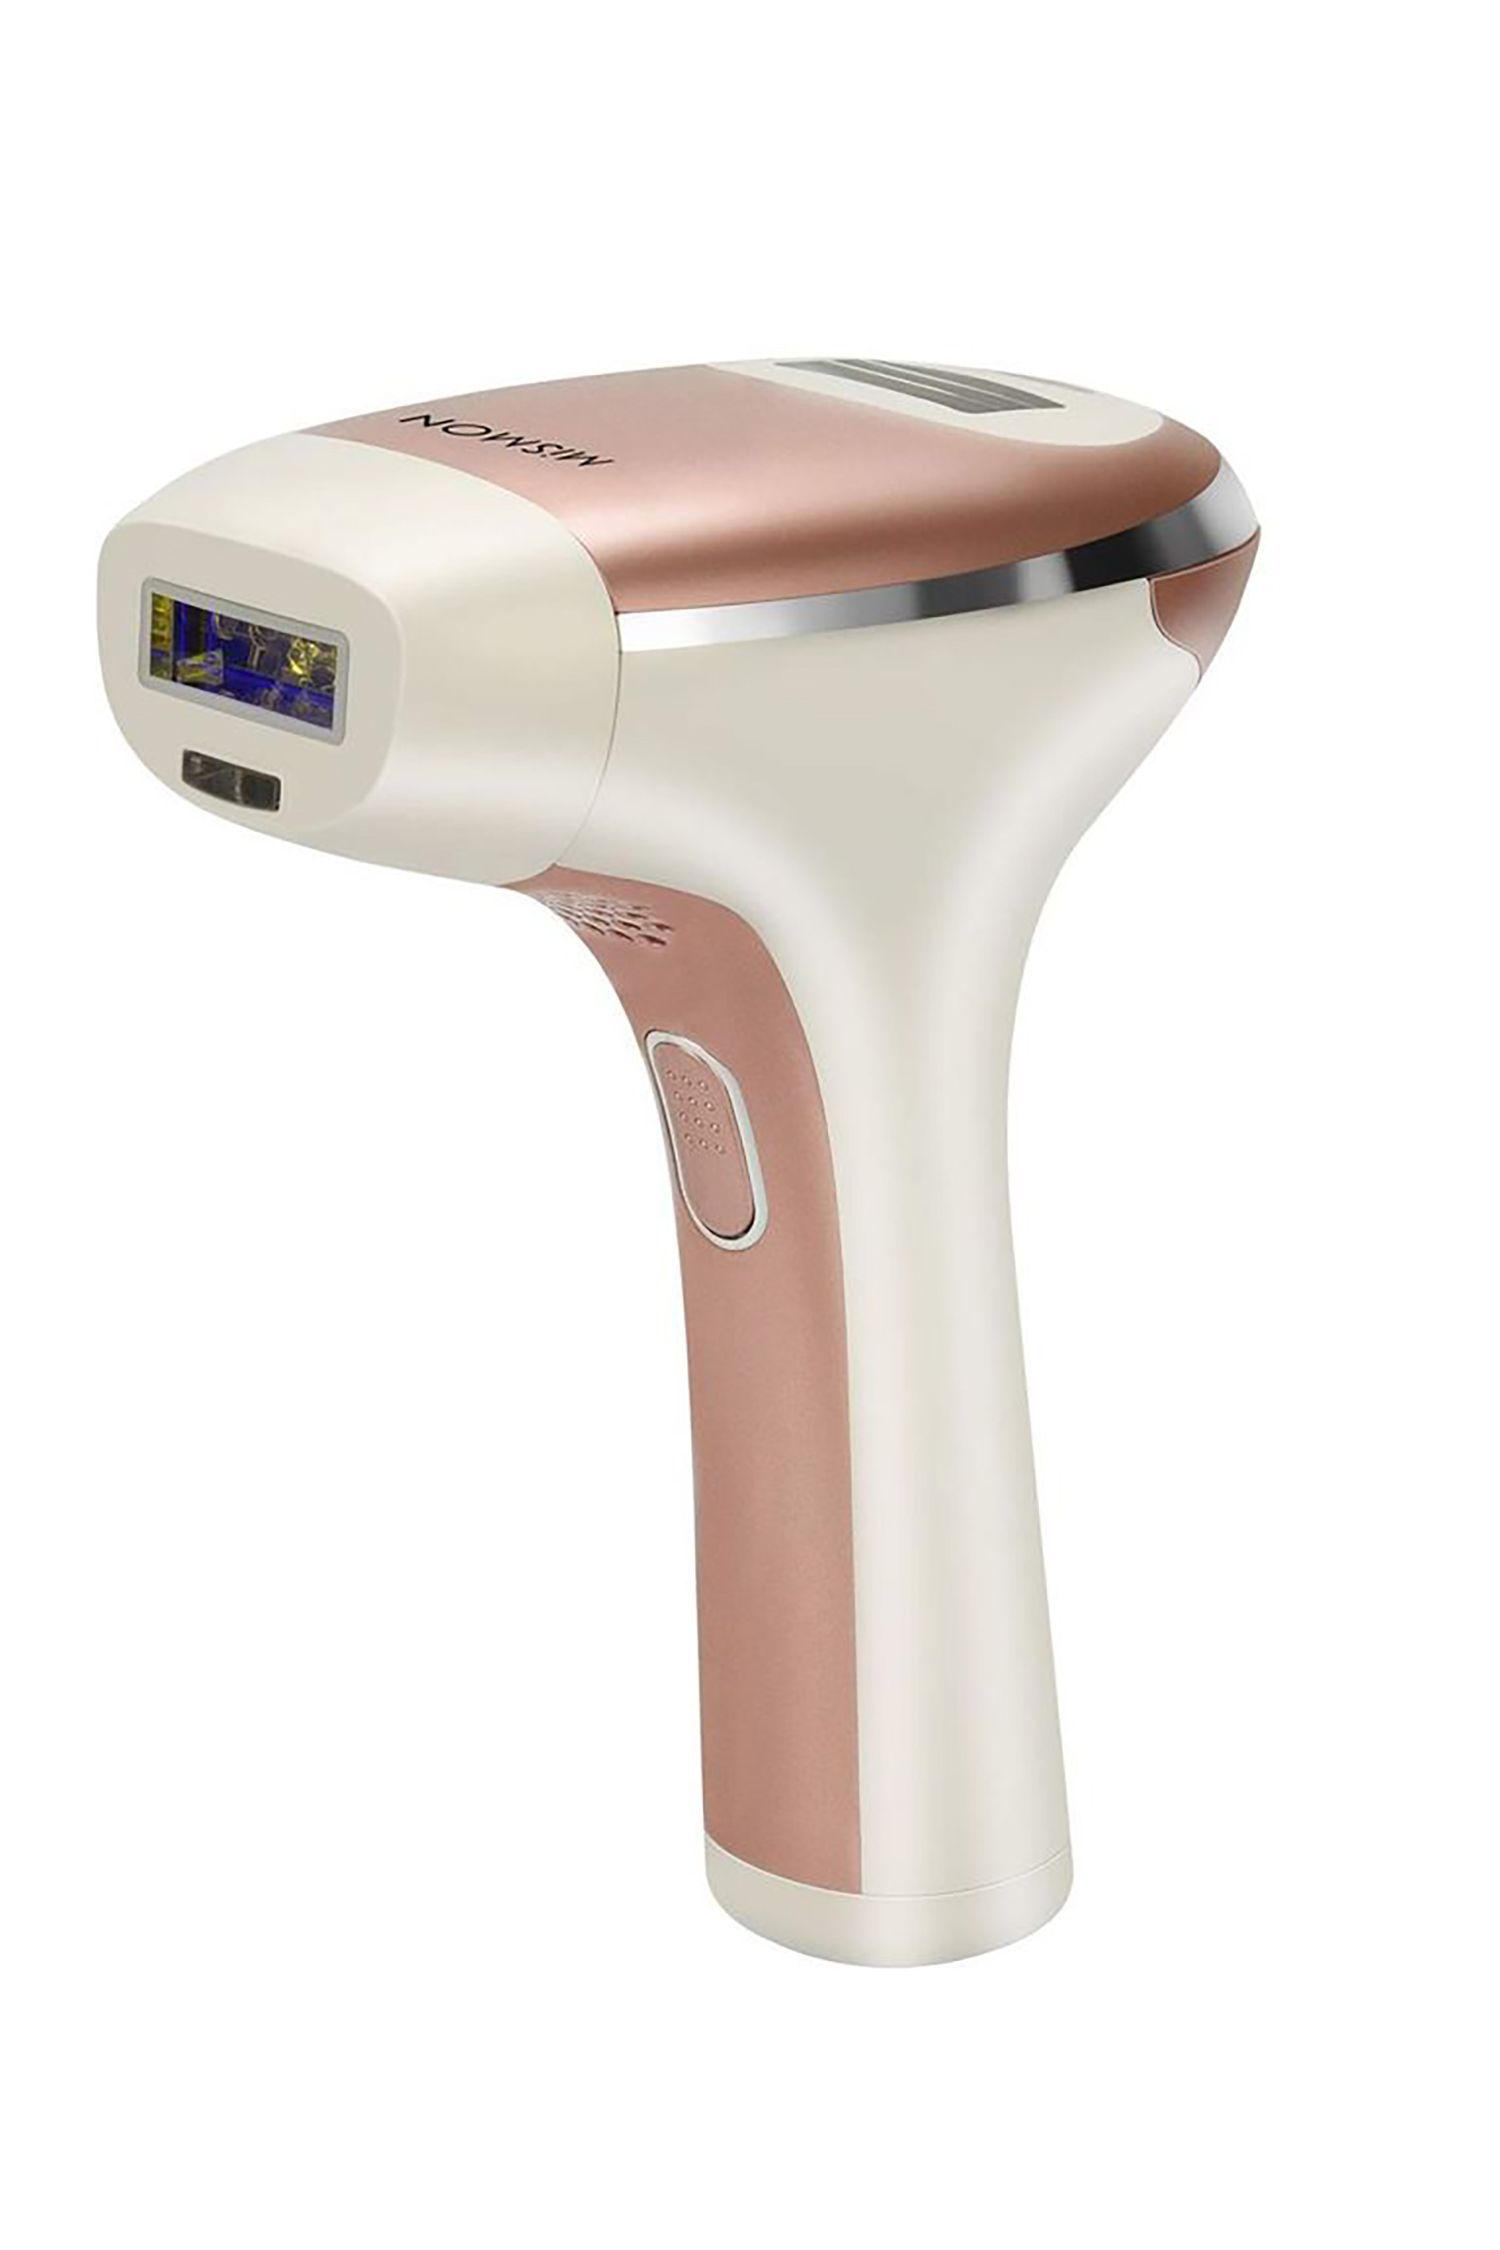 at home hair removal products